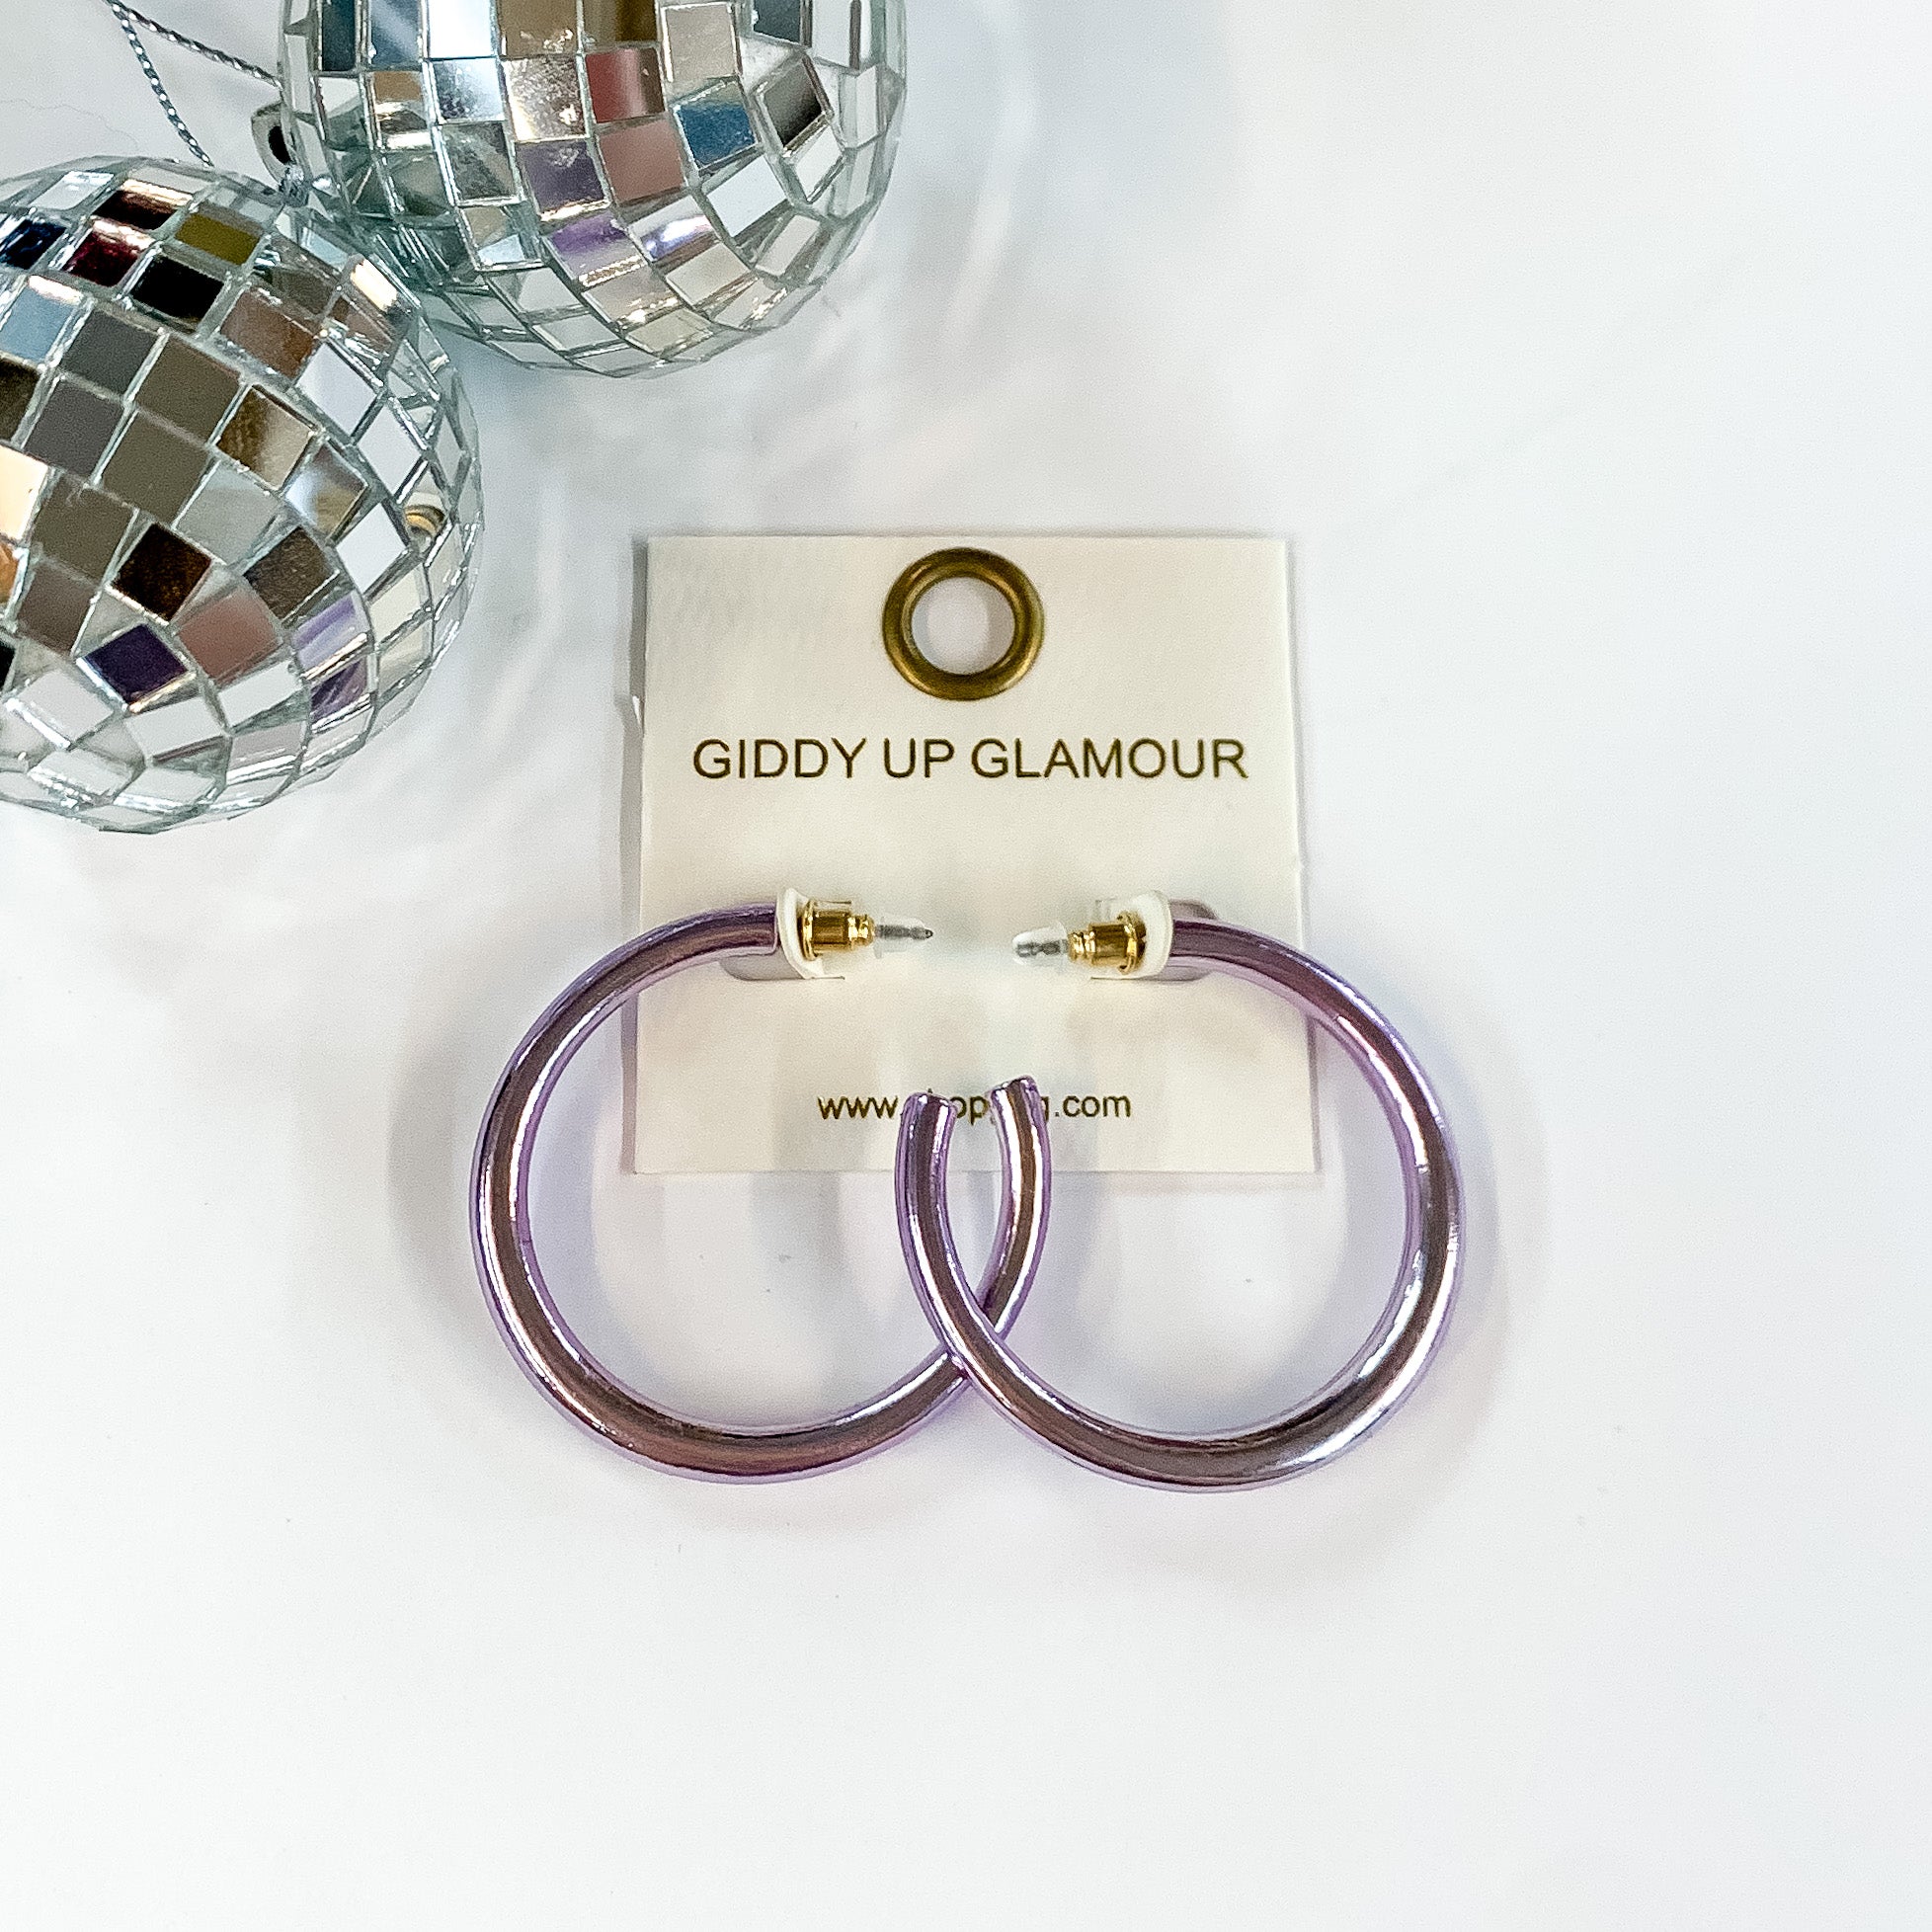 Light Up Medium Neon Hoop Earrings In Lavender. Pictured on a white background with disco balls in the top left corner.